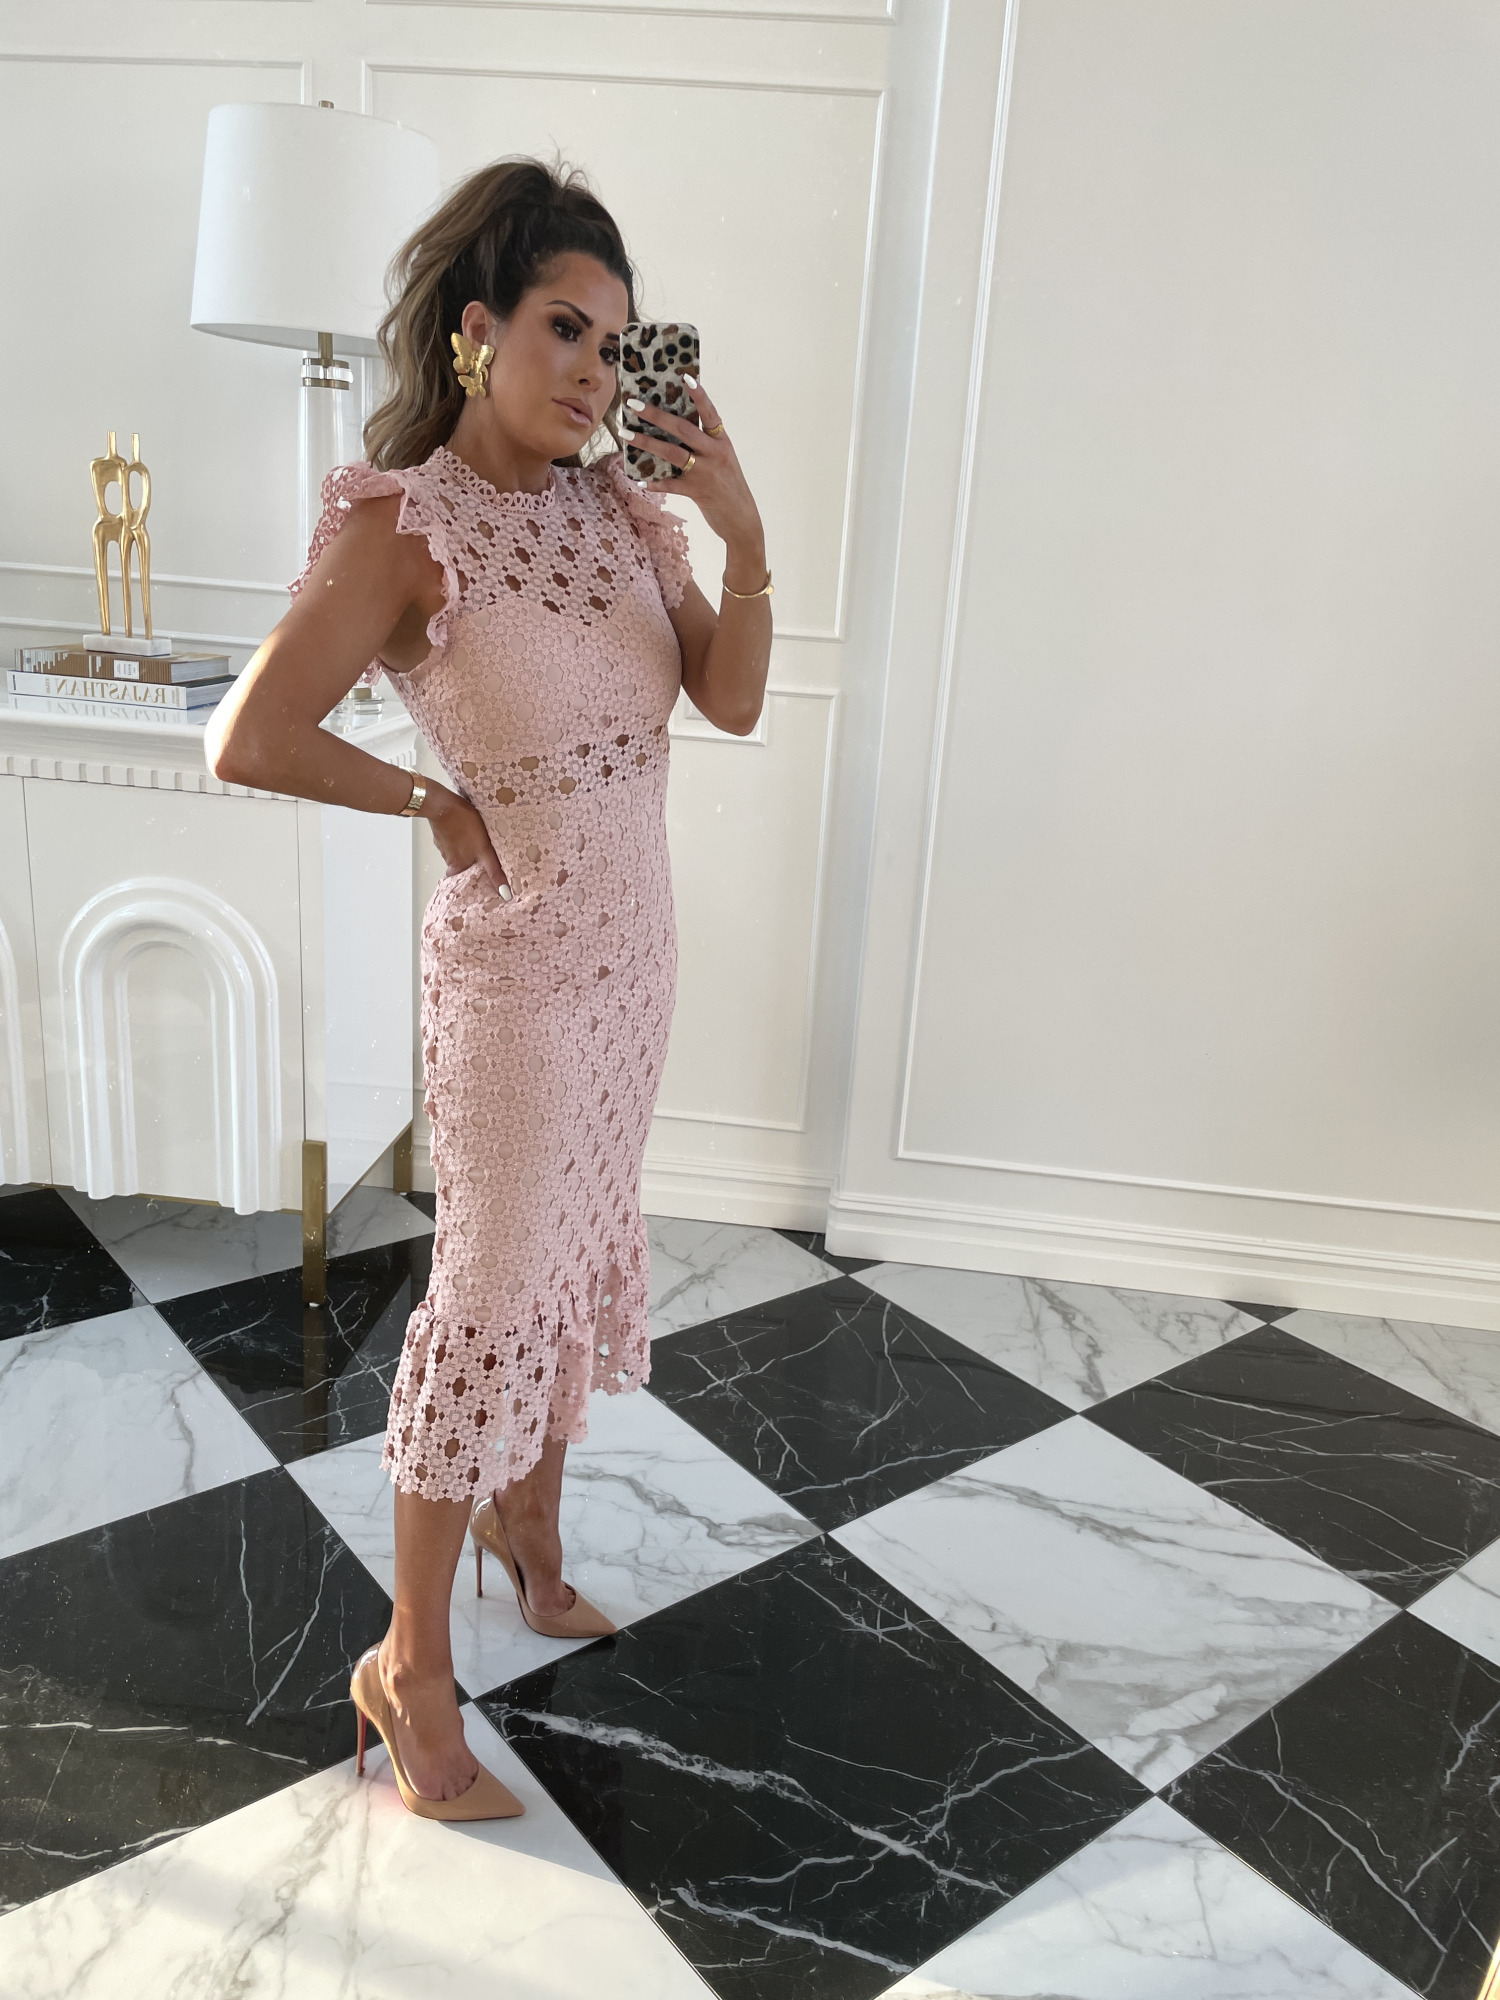 Instagram Recap by popular US life and style blog, The Sweetest Thing: image of Emily Gemma wearing a Red Dress pink lace ruffle hem dress, gold statement earrings, and tan heels